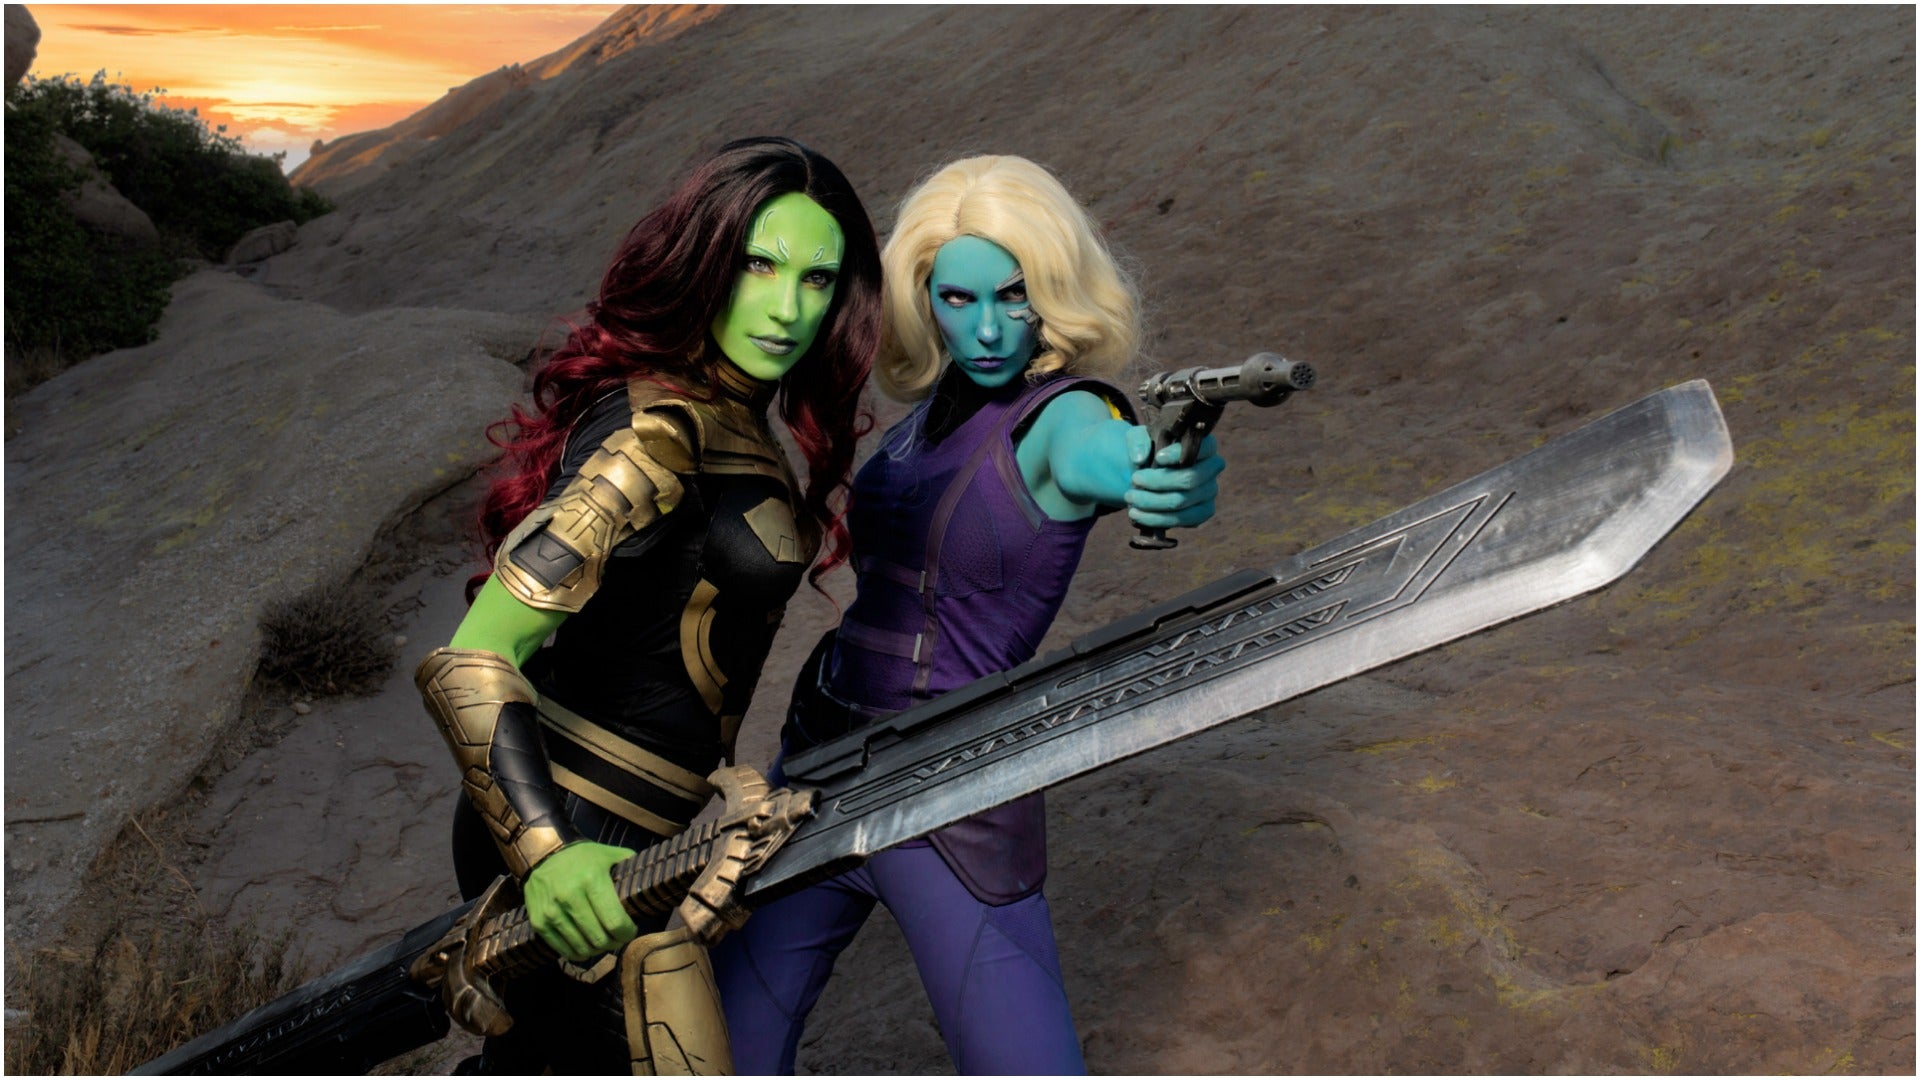 Nebula and Gamora from Marvel's What if